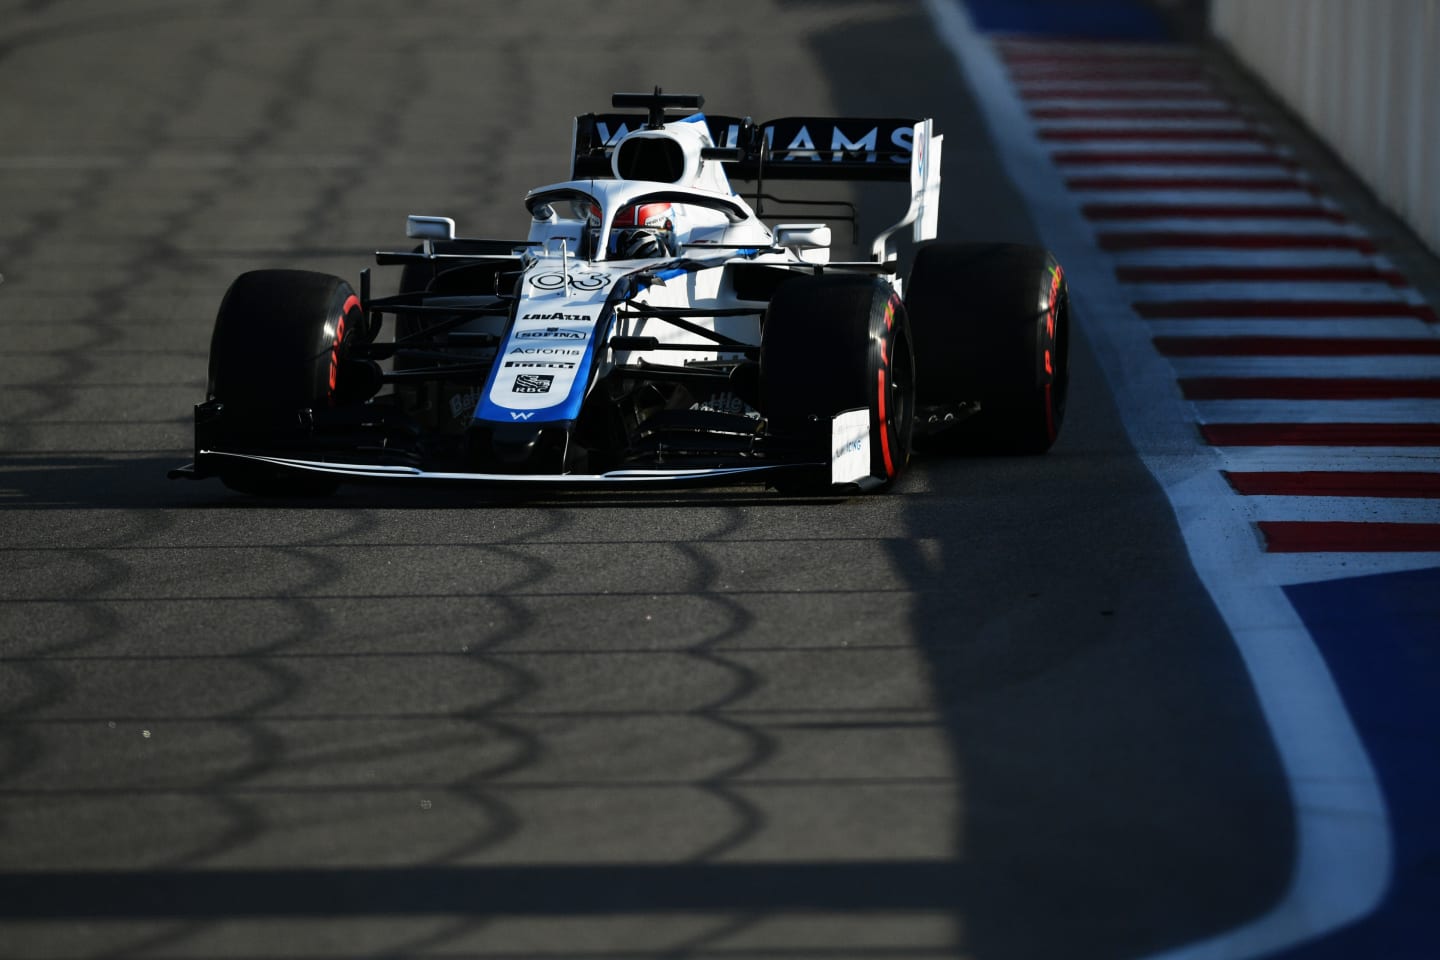 SOCHI, RUSSIA - SEPTEMBER 25: George Russell of Great Britain driving the (63) Williams Racing FW43 Mercedes on track during practice ahead of the F1 Grand Prix of Russia at Sochi Autodrom on September 25, 2020 in Sochi, Russia. (Photo by Dan Mullan/Getty Images)